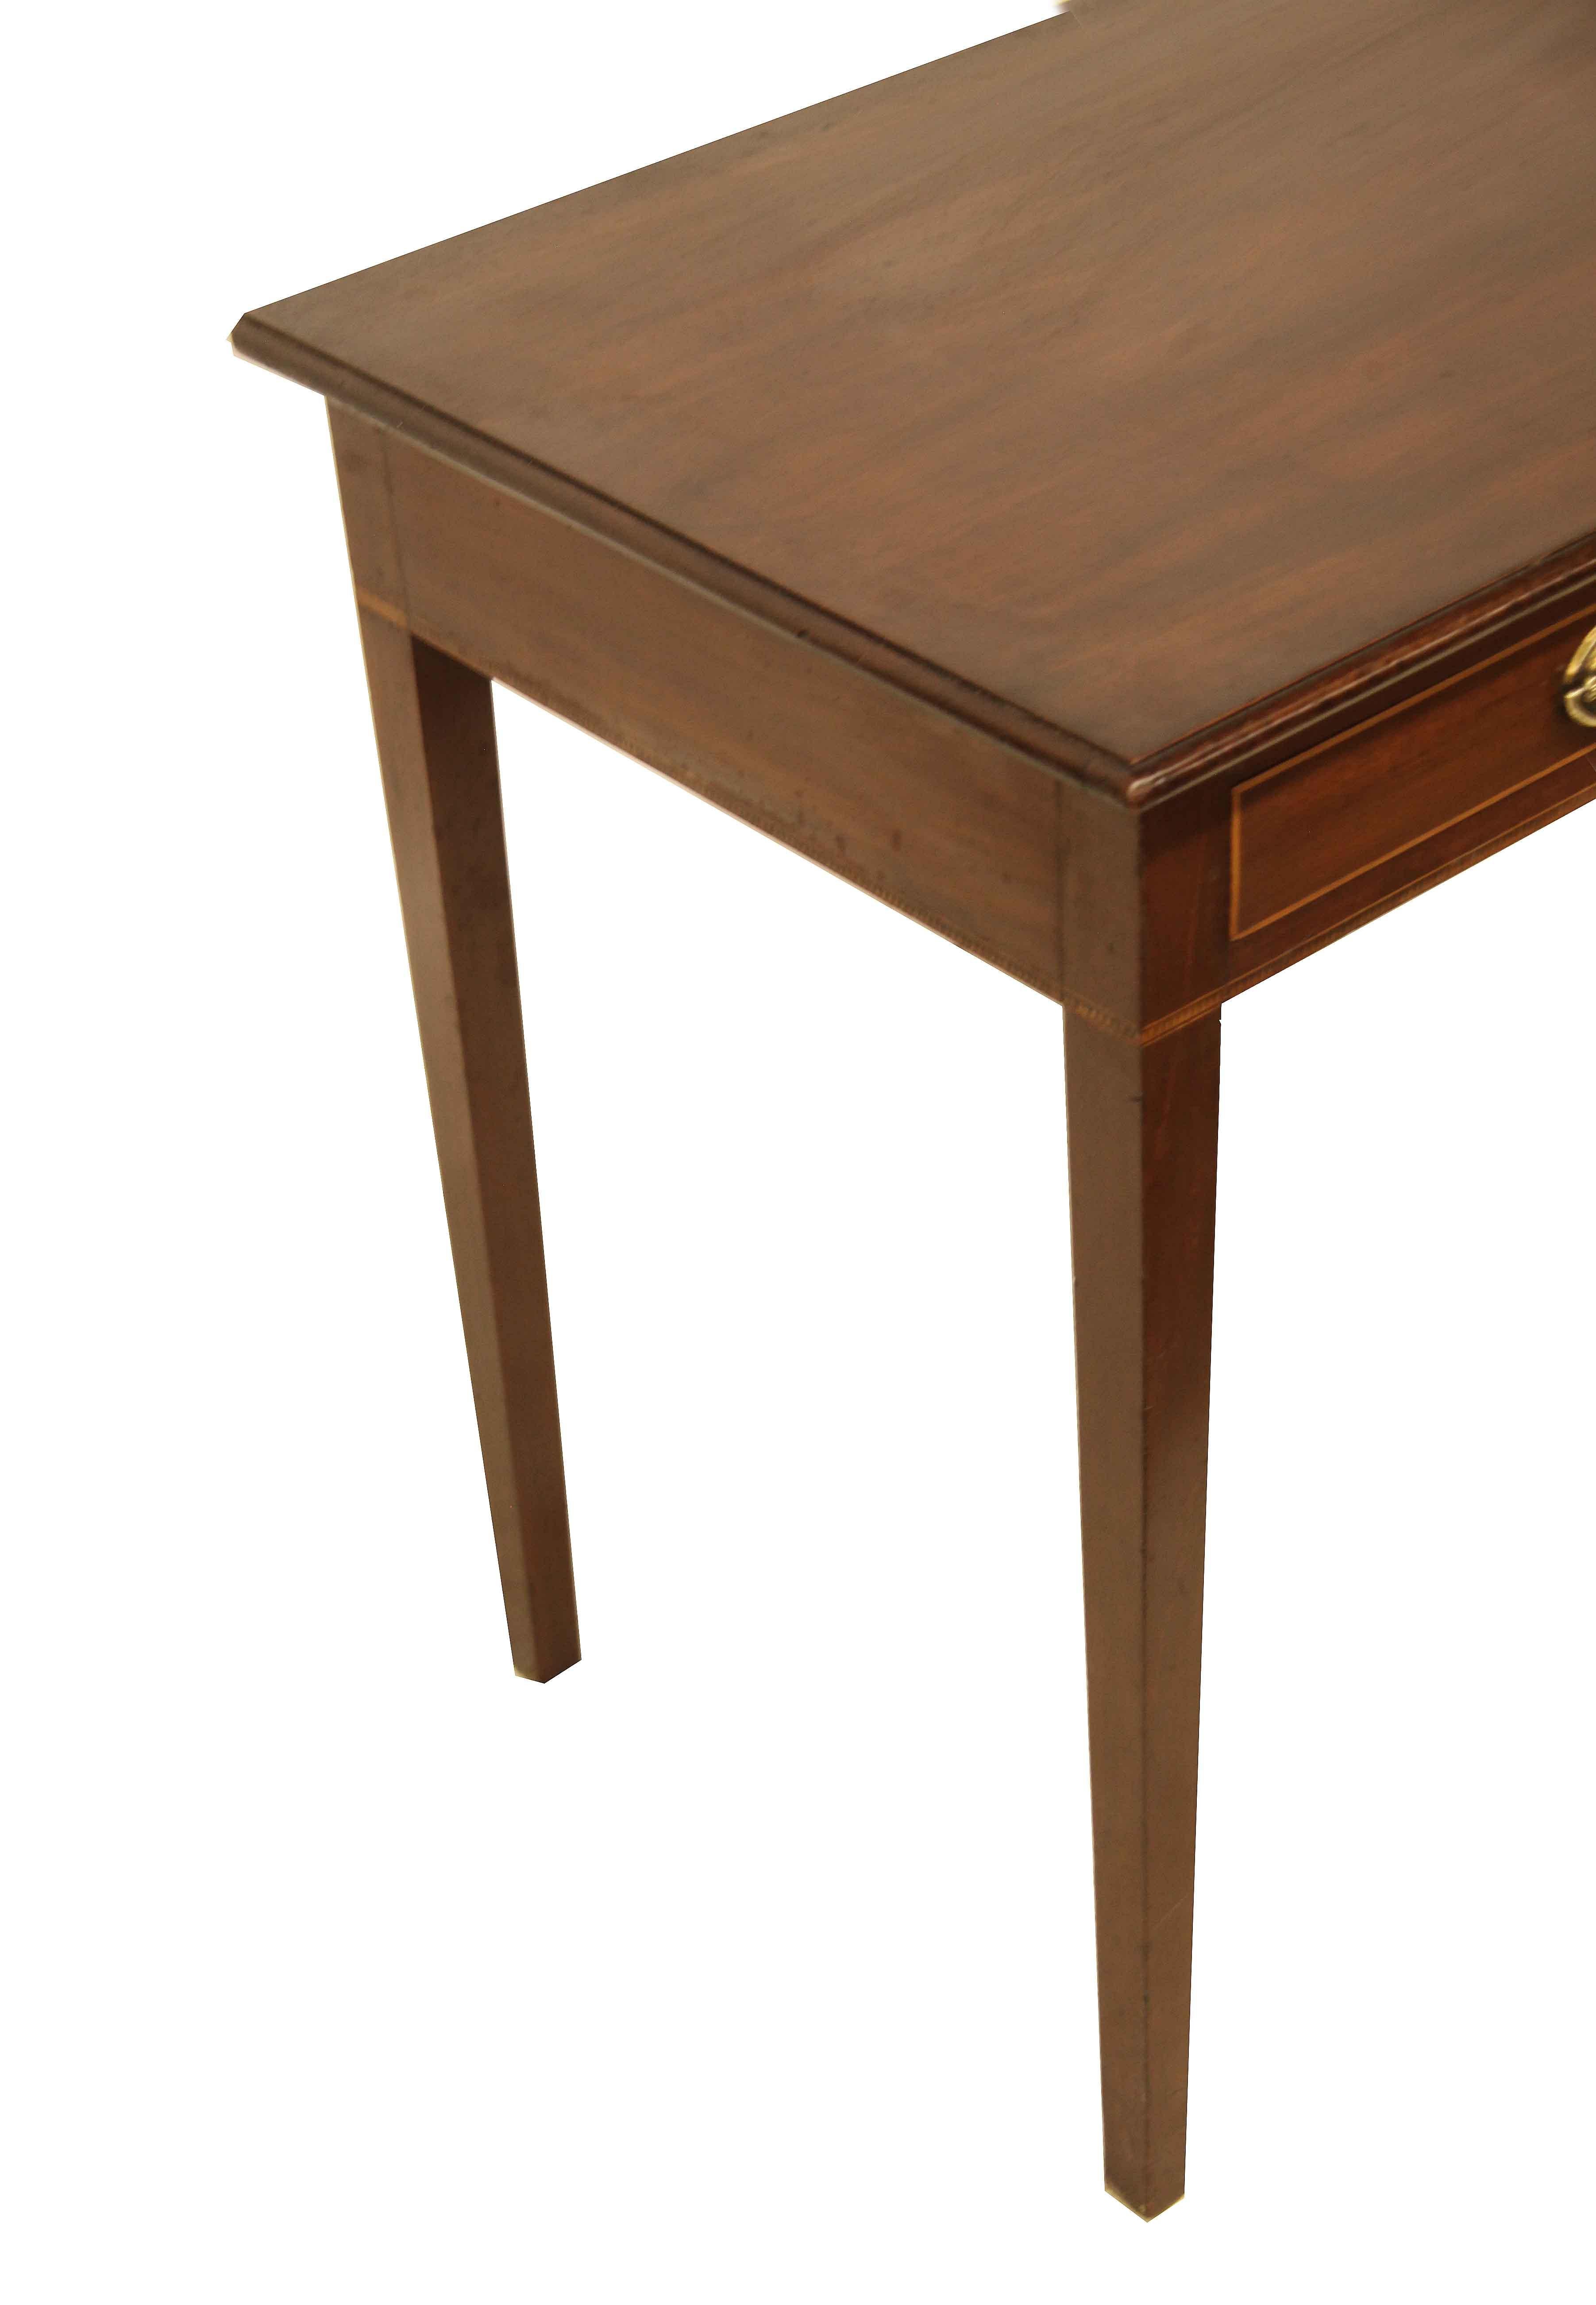 English Hepplewhite two drawer side table , the top with beautiful color and patina and a ''bull nose'' shaped molding;  the two drawers retain the original oval Hepplewhite brass pulls, the perimeter of the drawers are edged in boxwood; below the